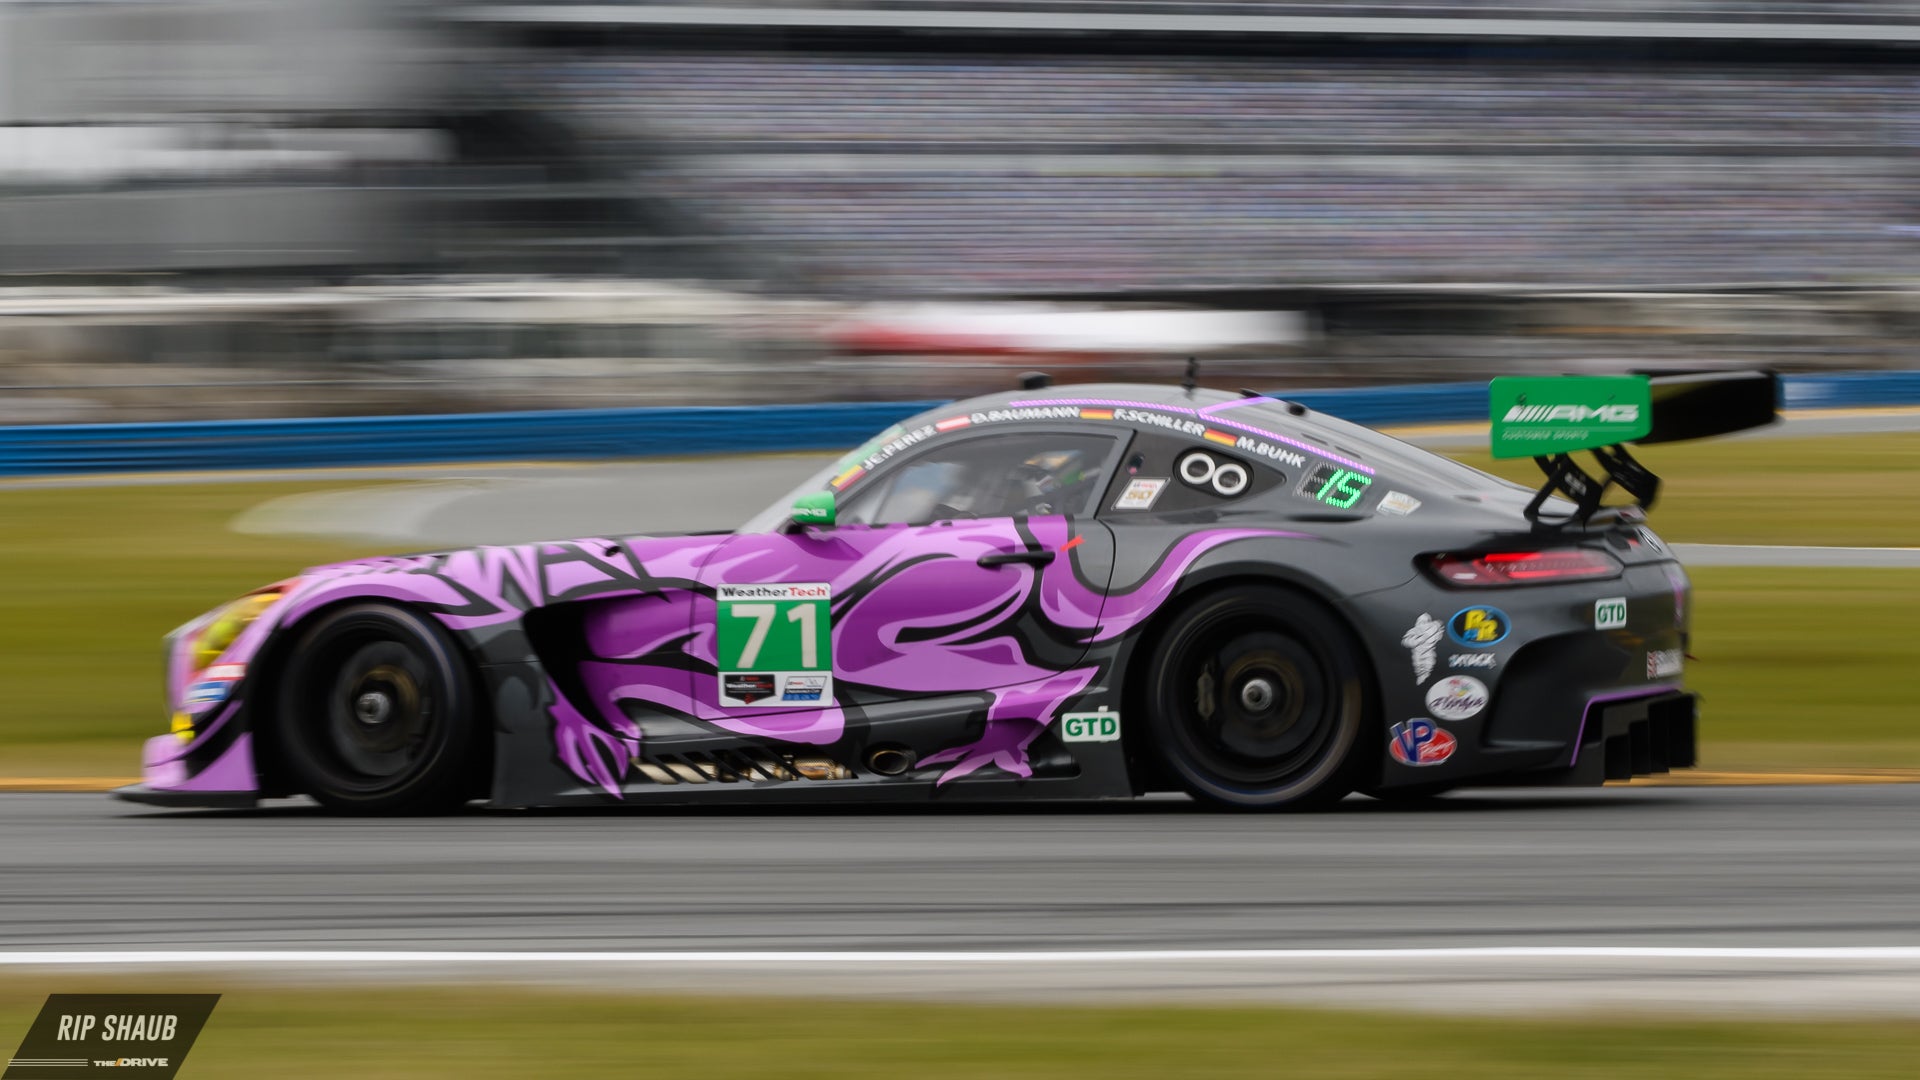 7 Hottest Liveries From the 2019 Rolex 24 at Daytona